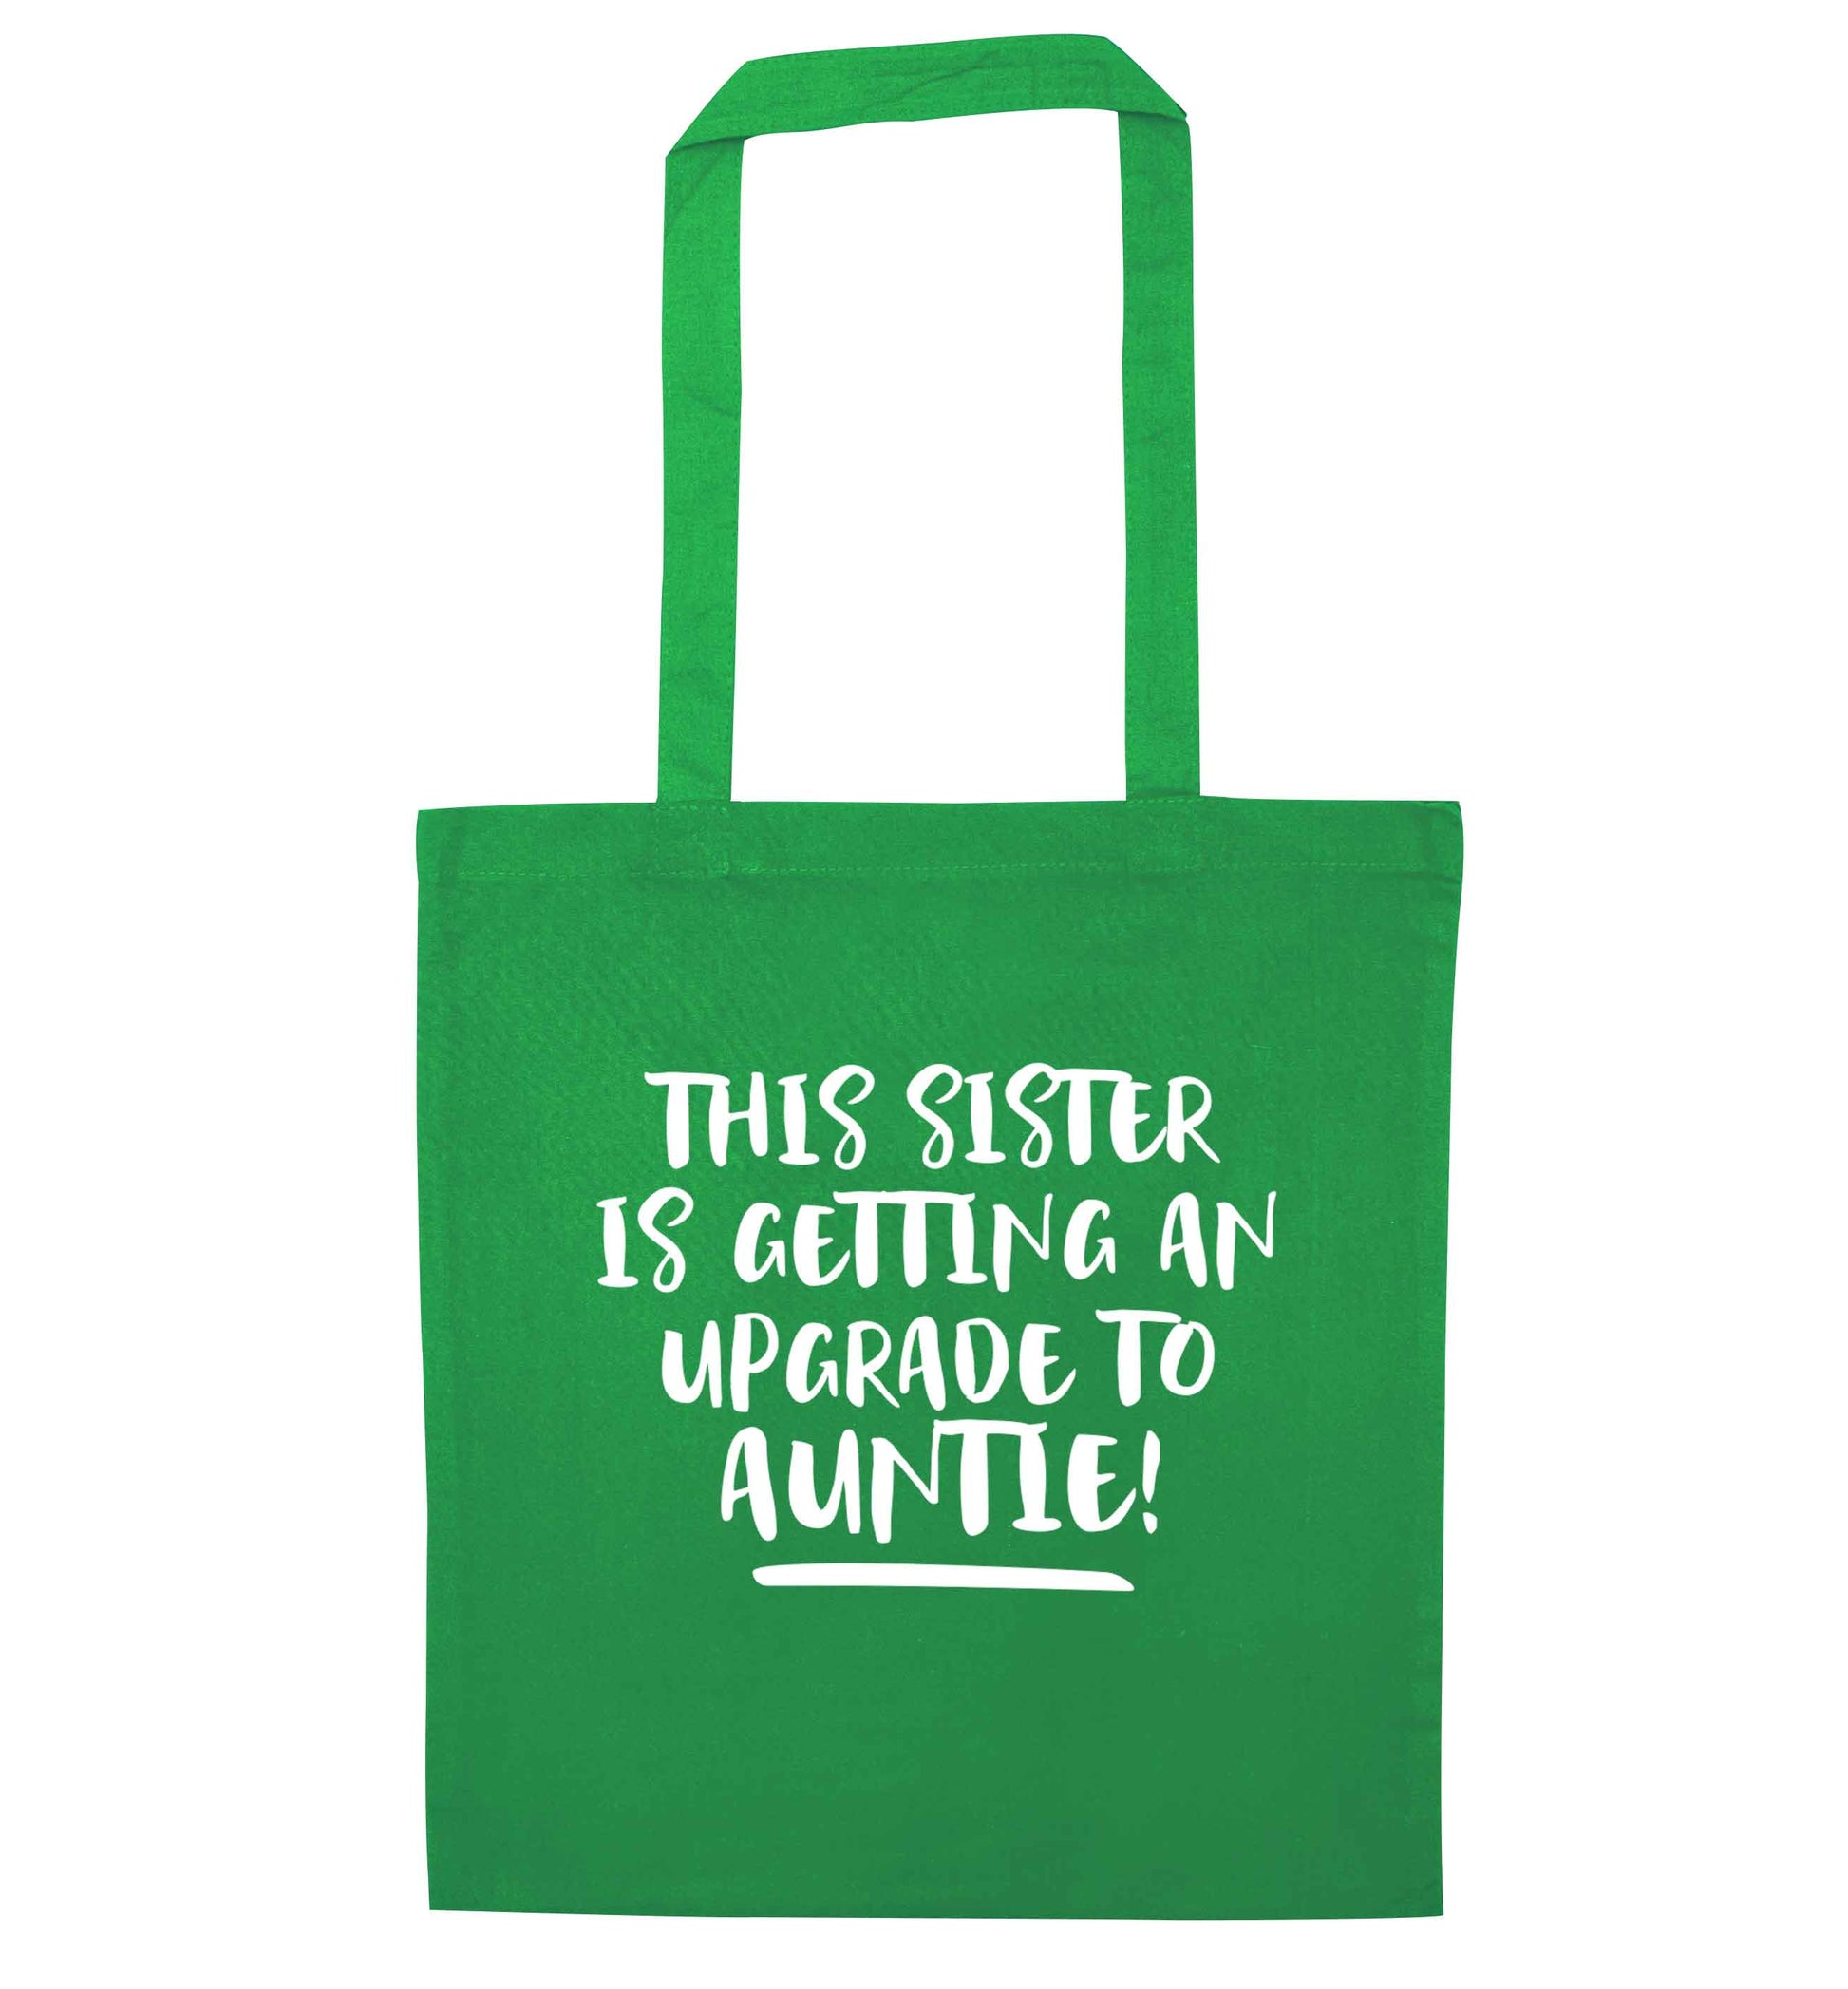 This sister is getting an upgrade to auntie! green tote bag